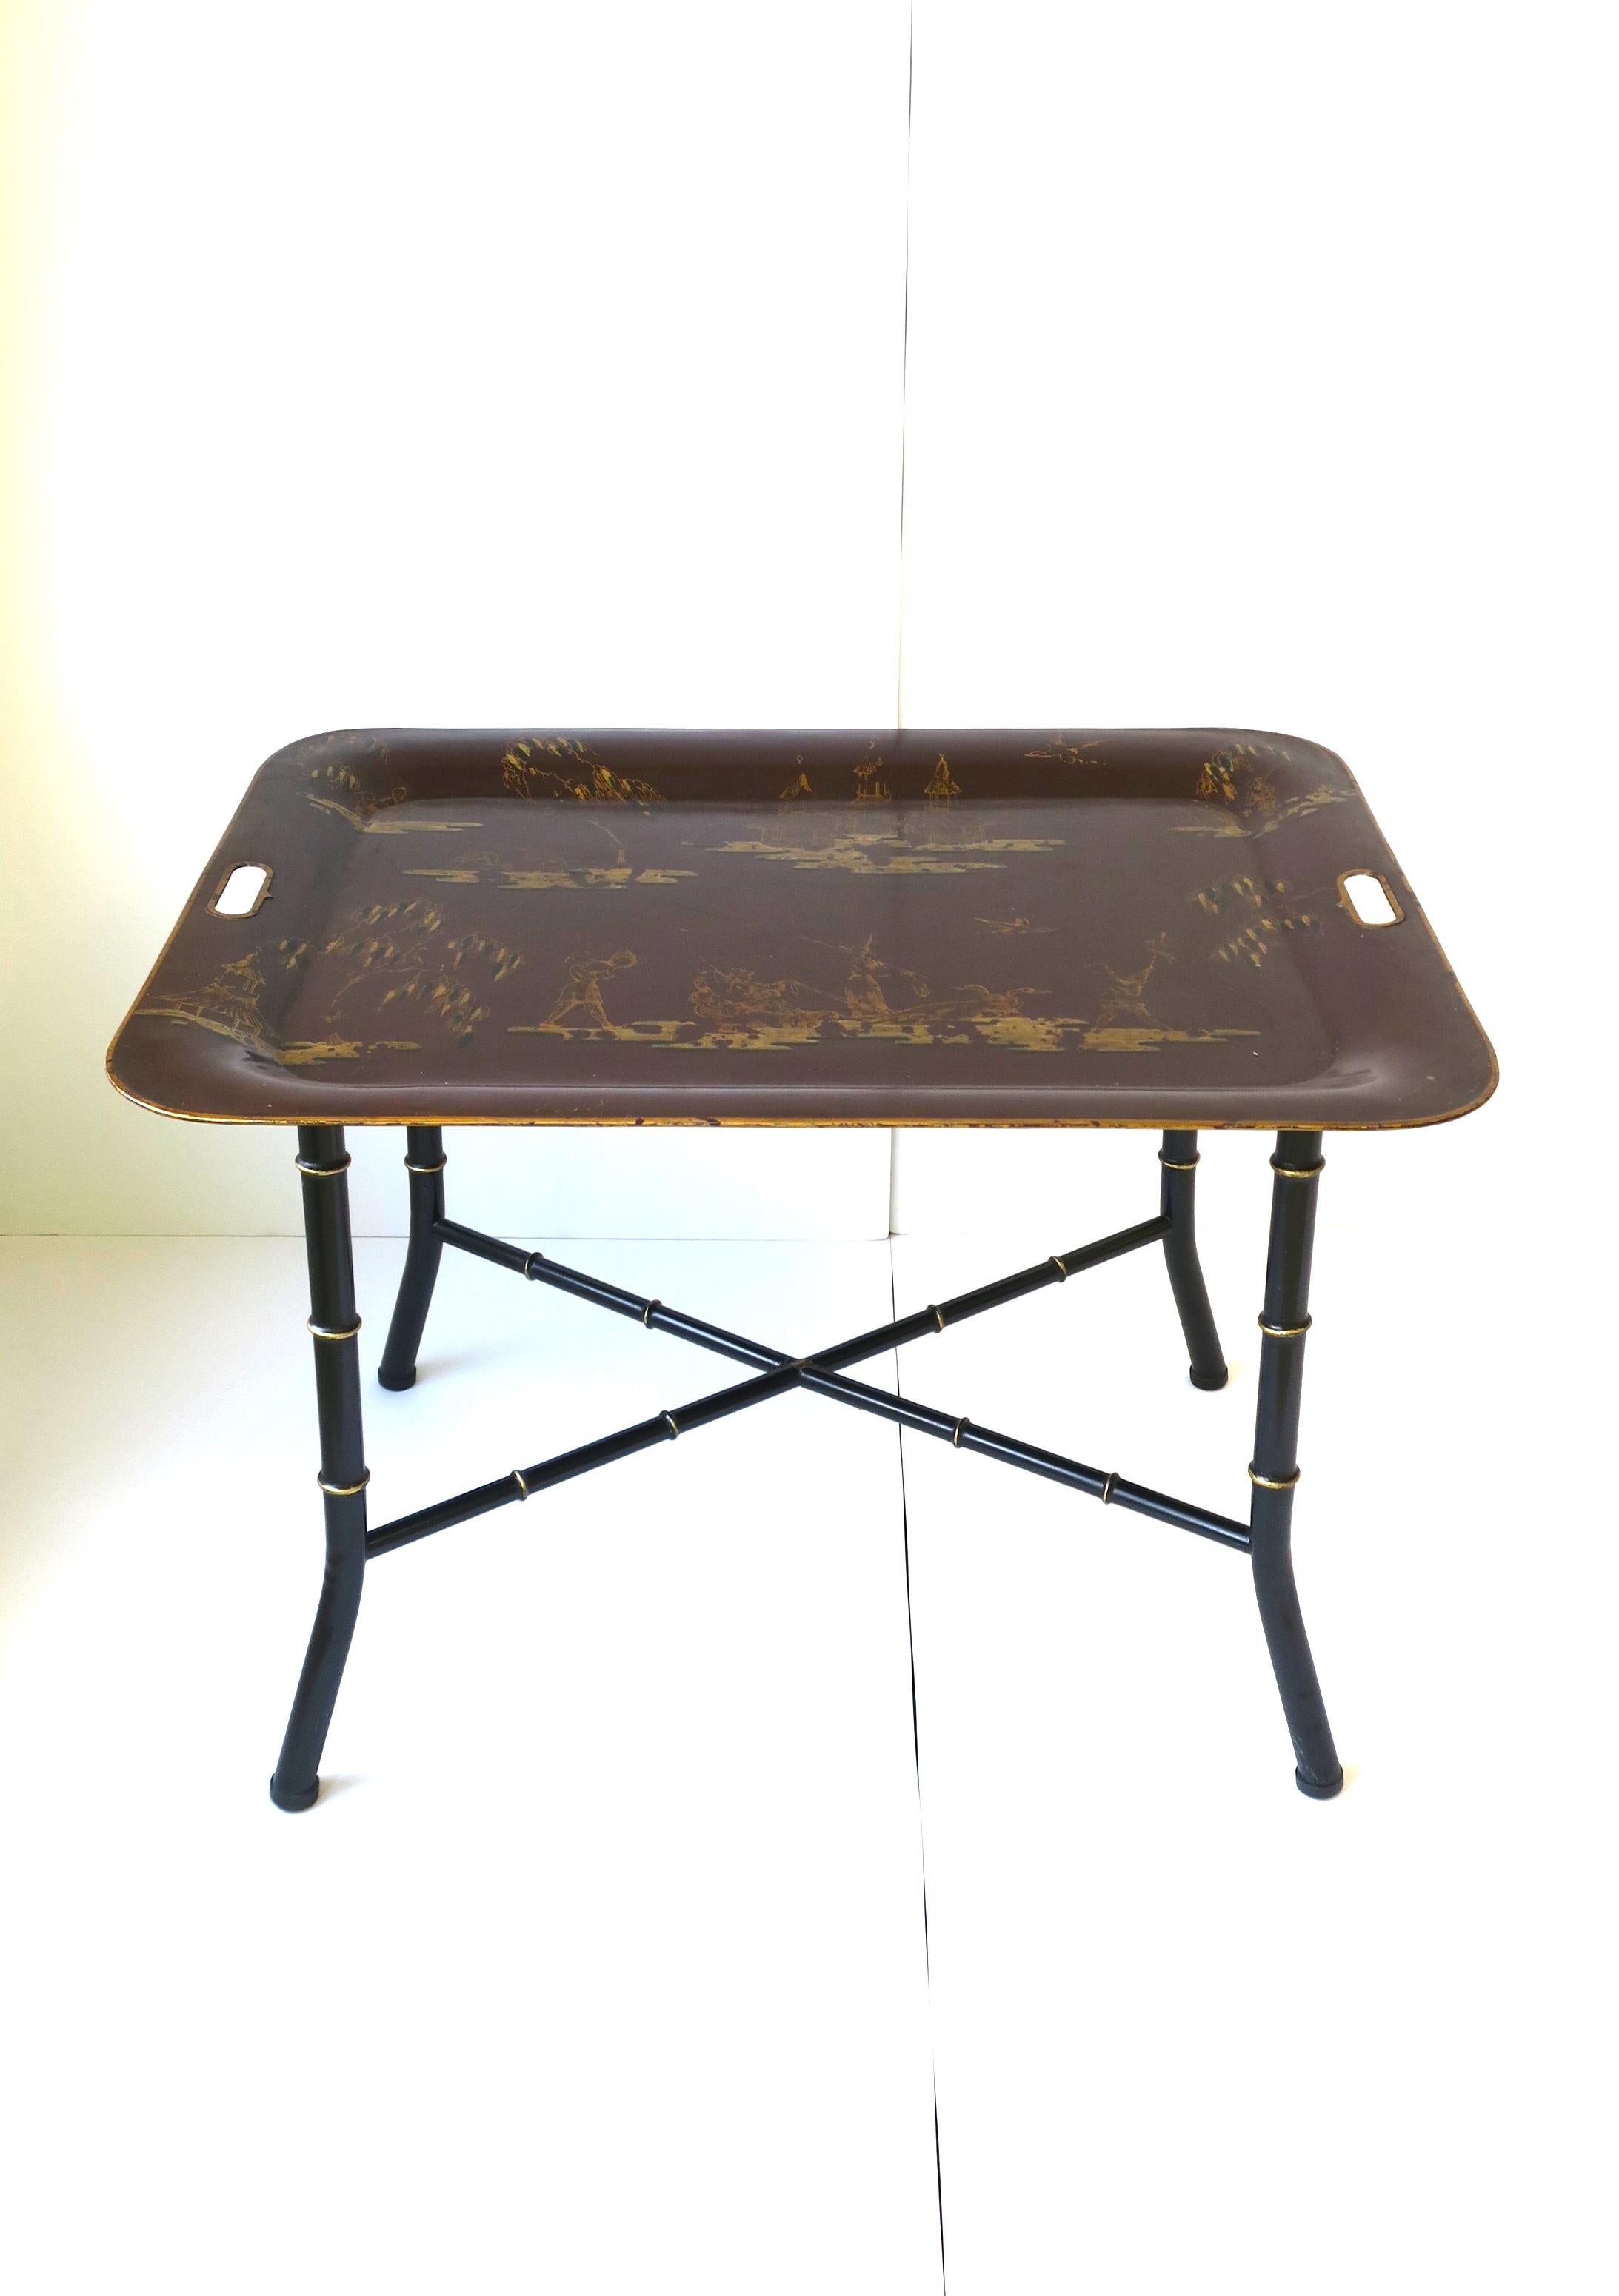 An Italian tray table cocktail table with a Chinoiserie tole tray top and black faux bamboo base, circa mid-20th century, Italy. Table tray is a red burgundy with a gold Chinoiserie landscape and figurative design. Table's base is a black and gold